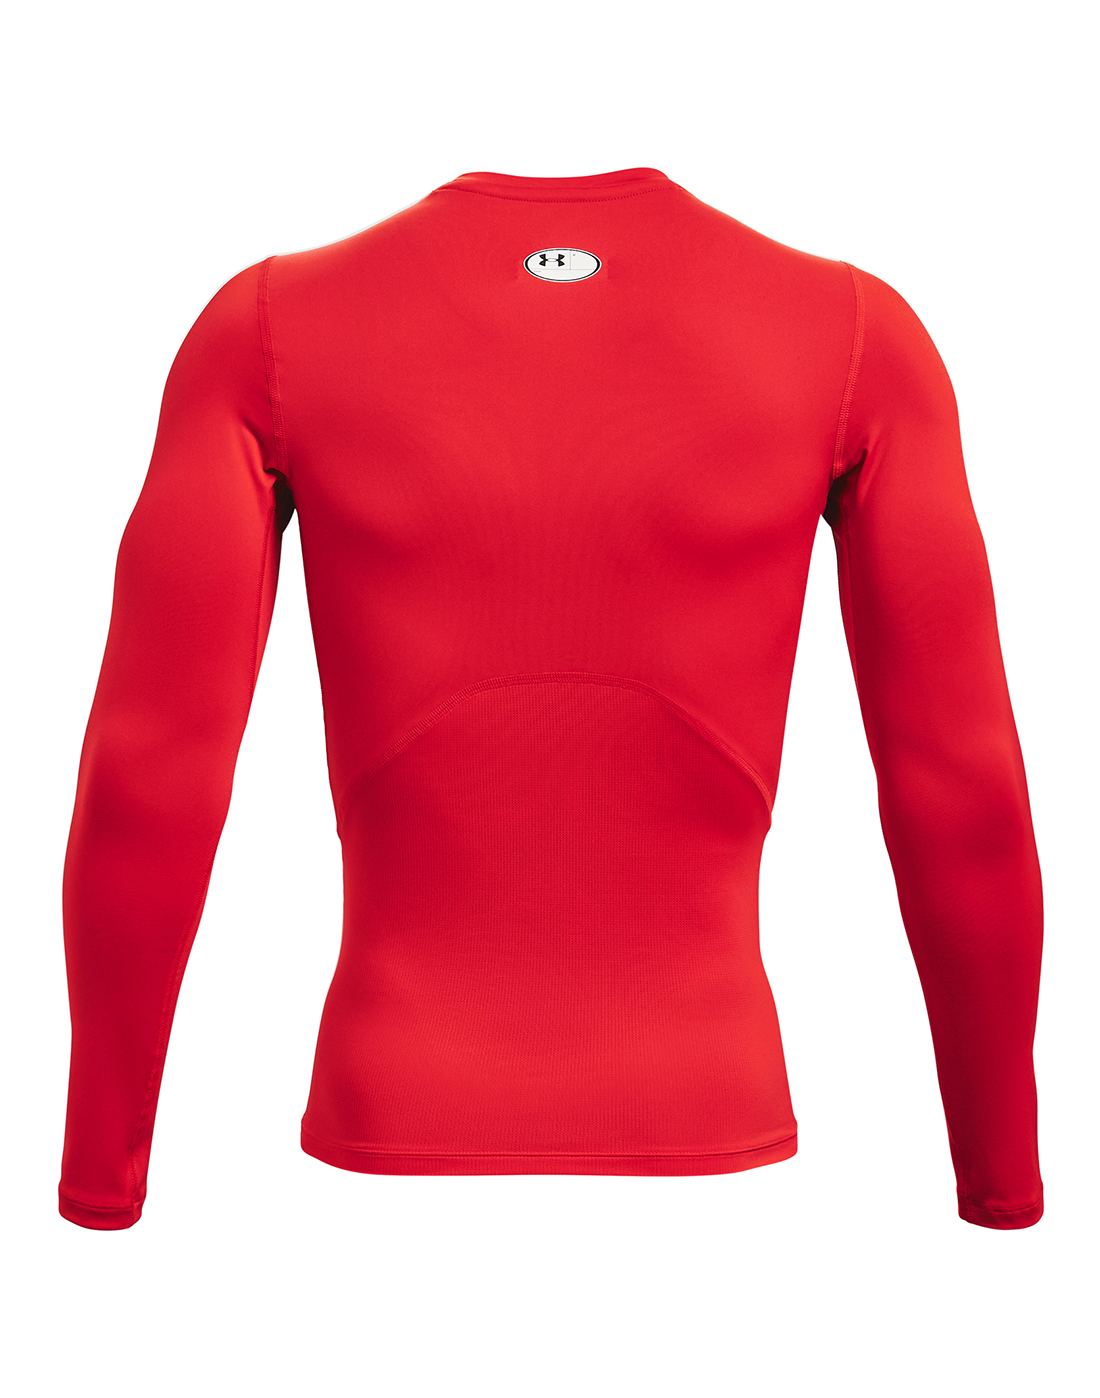 Under Armour Adults Heatgear Armour Long Sleeve Top - Red | Life Style Sports UK